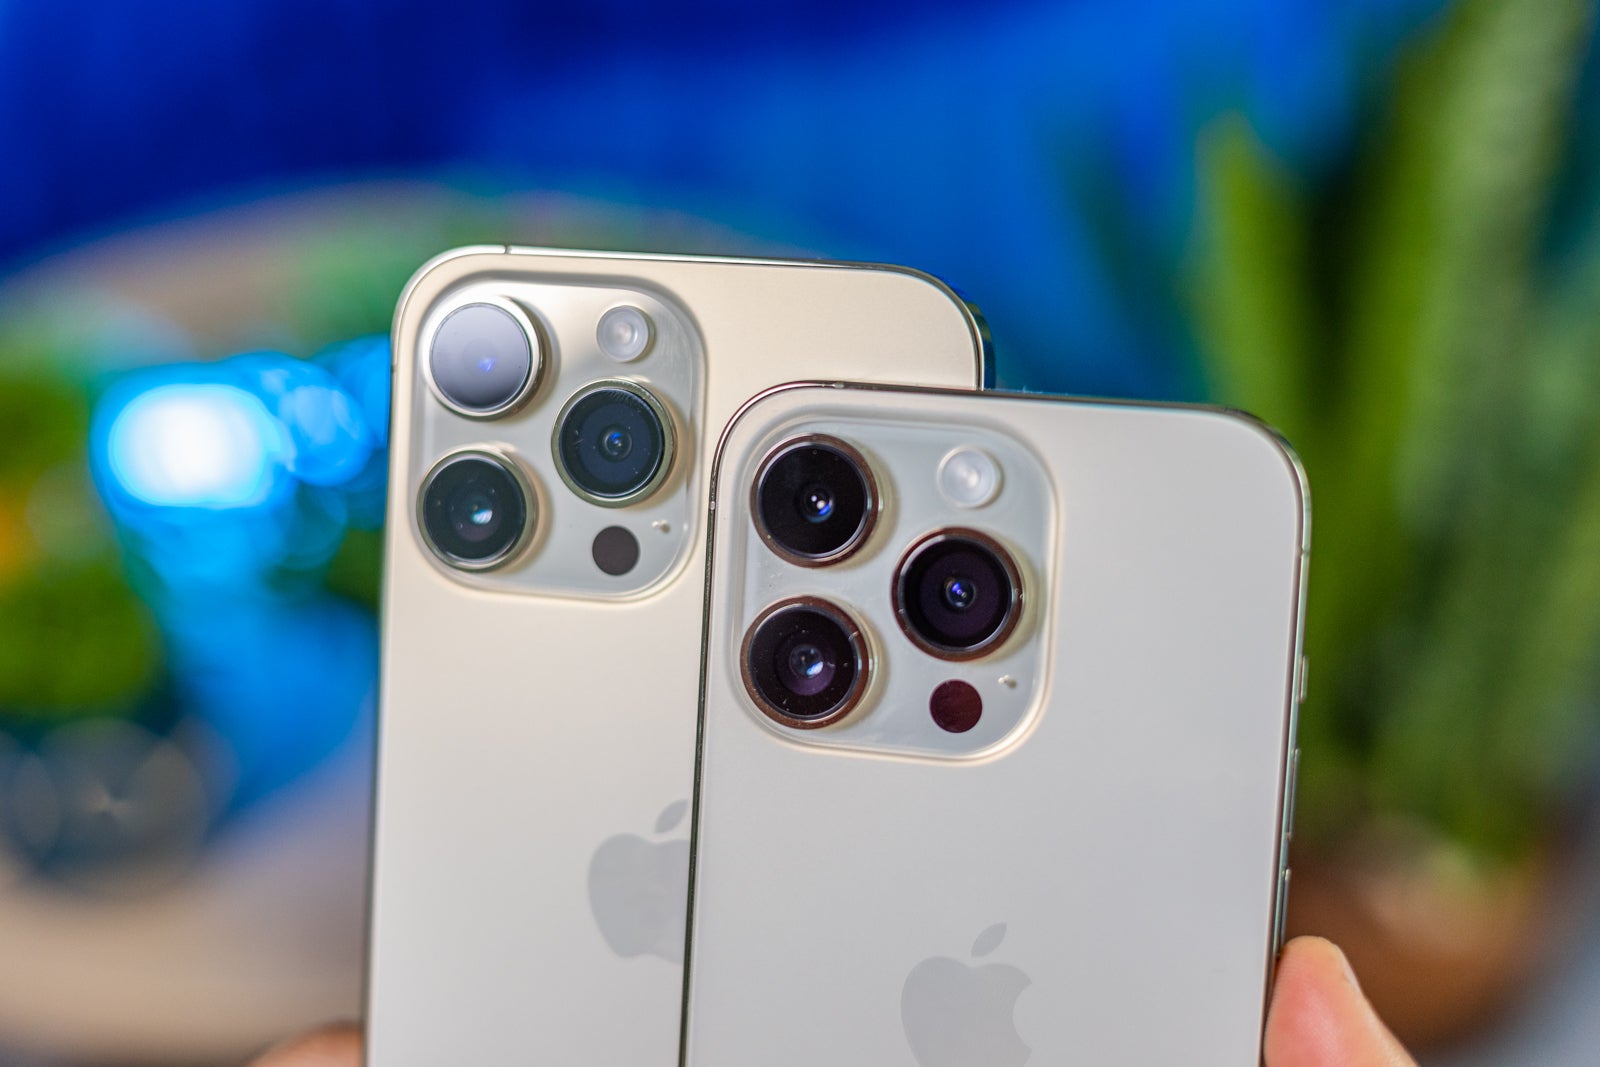 (Image Credit - PhoneArena) iPhone 14 Pro vs 14 Pro Max cameras - Apple iPhone 14 Pro Max vs iPhone 14 Pro: Pick on your own size!